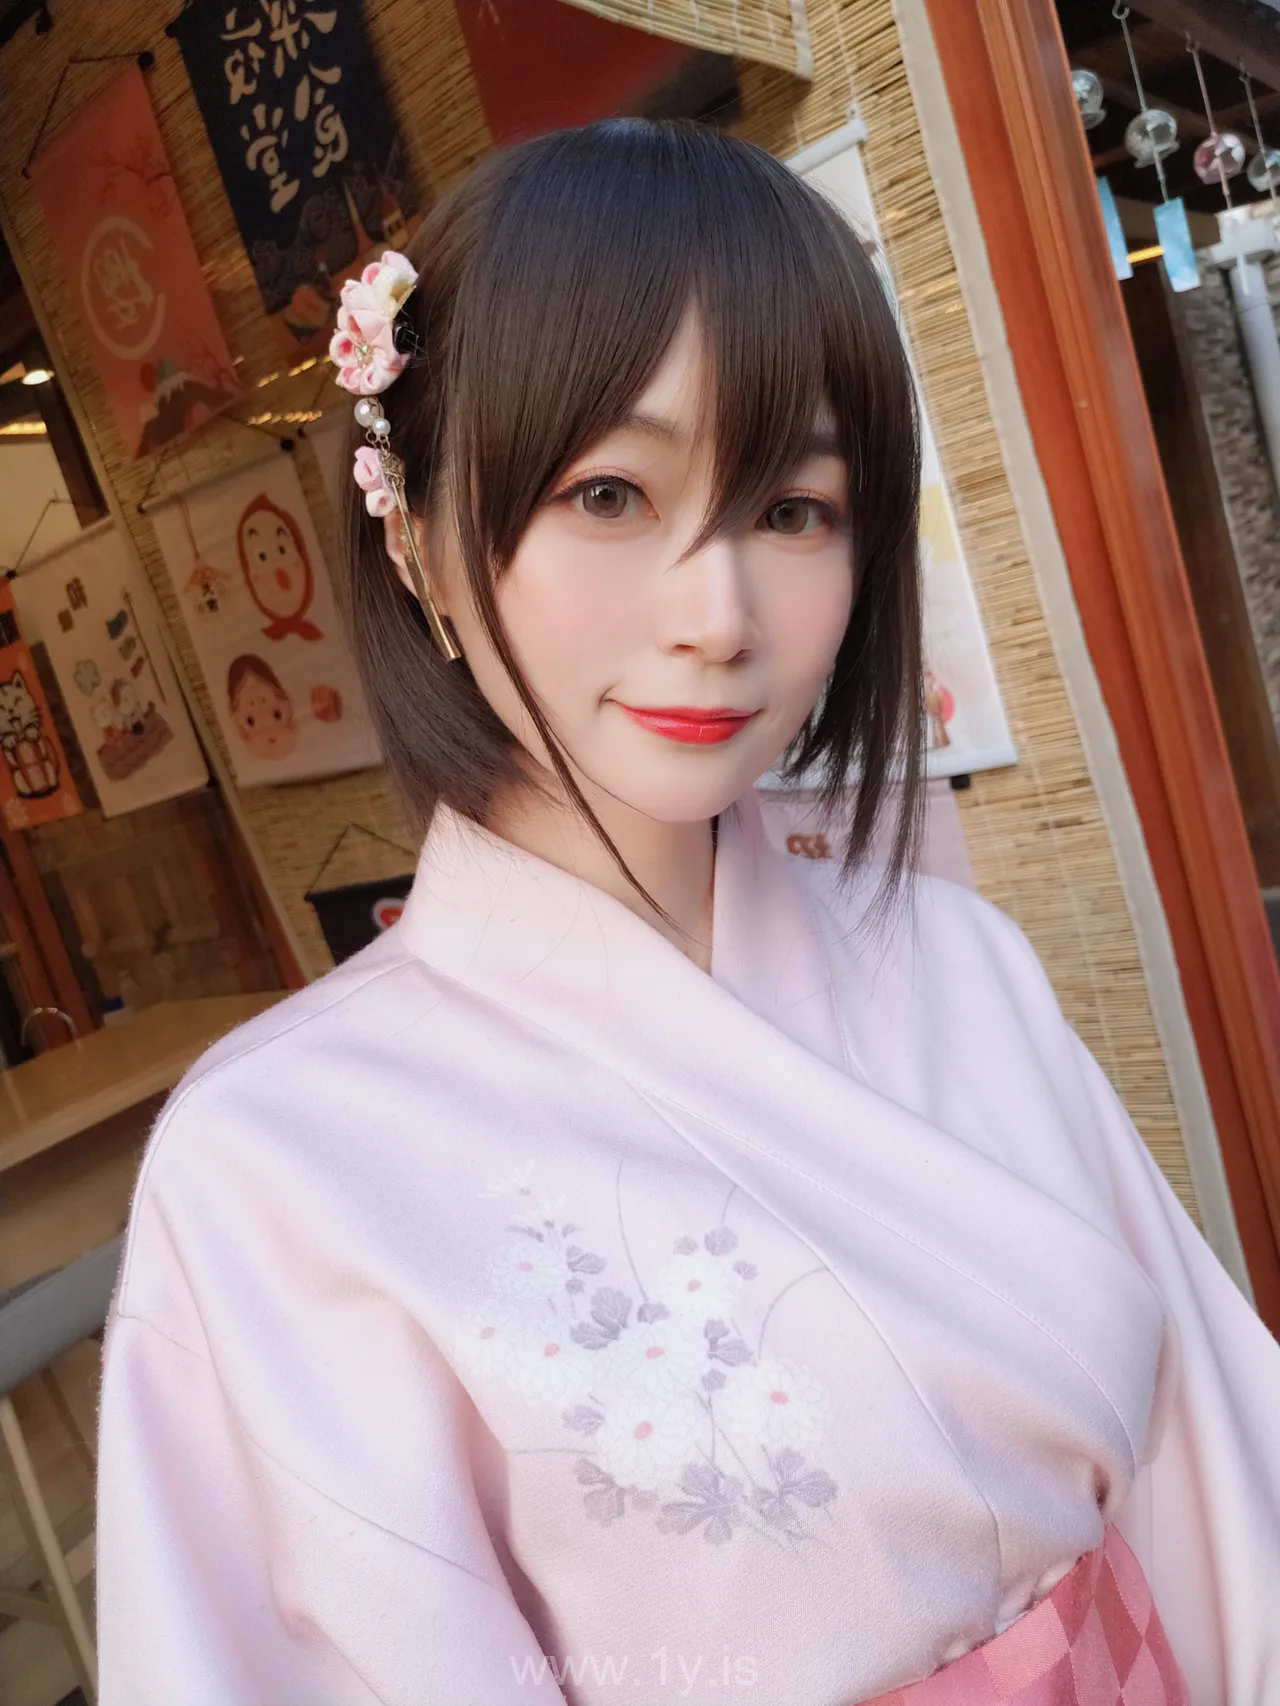 Coser@白银81 NO.012 Well Done Chinese Homebody Girl 和服温泉